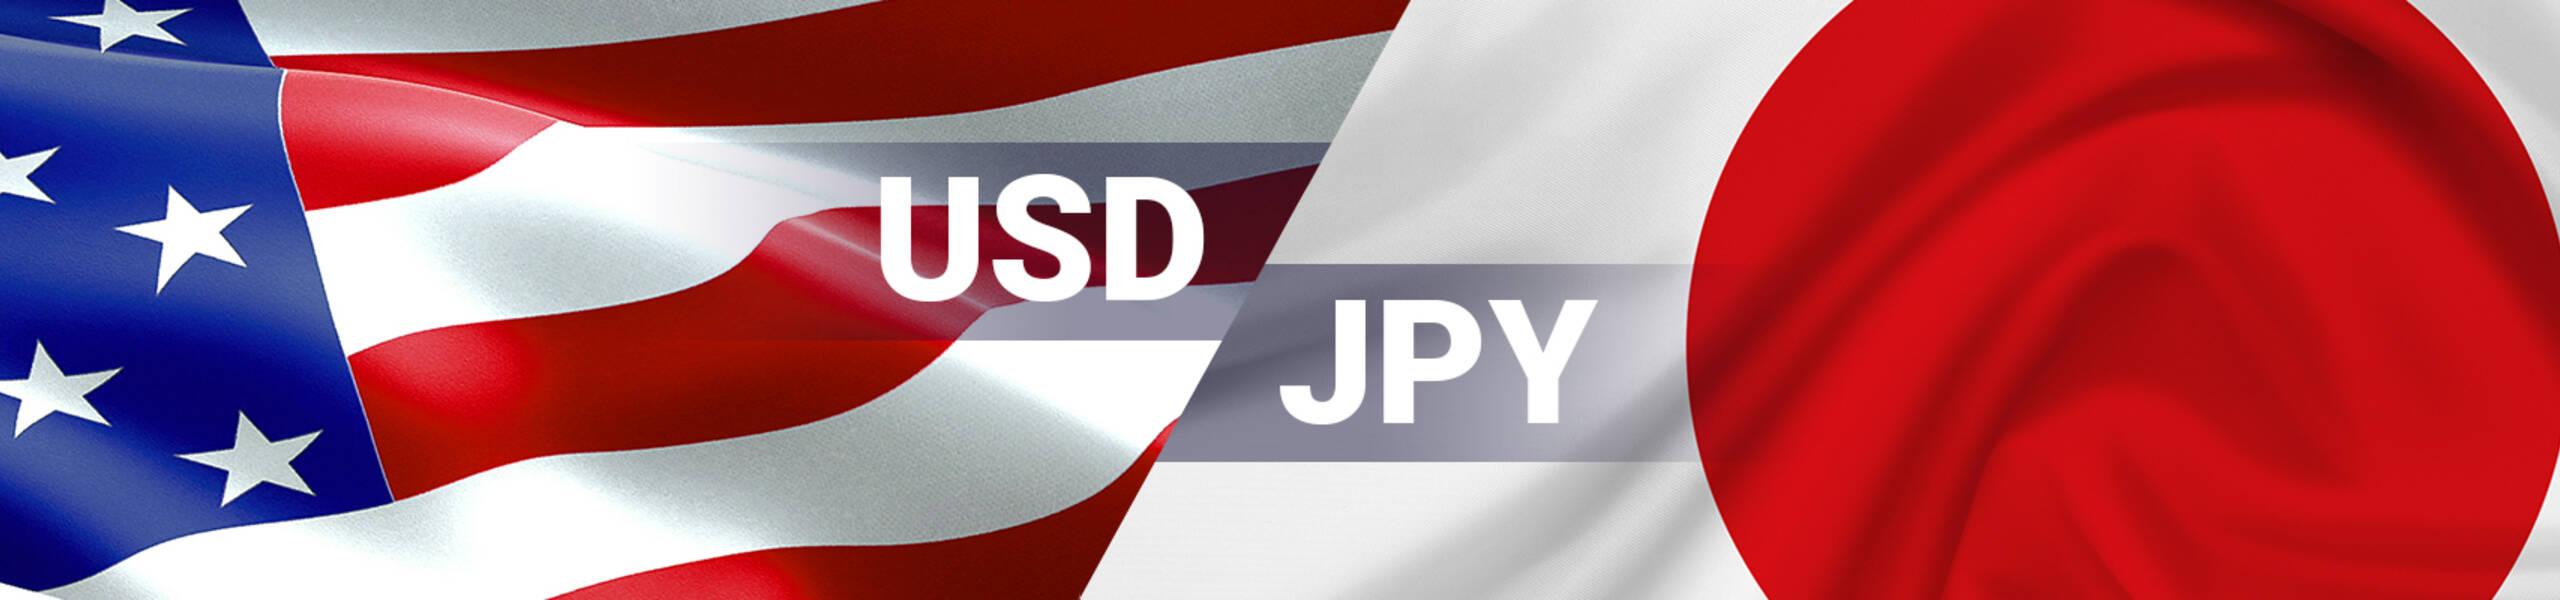 USD/JPY Dailyレポート 2017/12/18